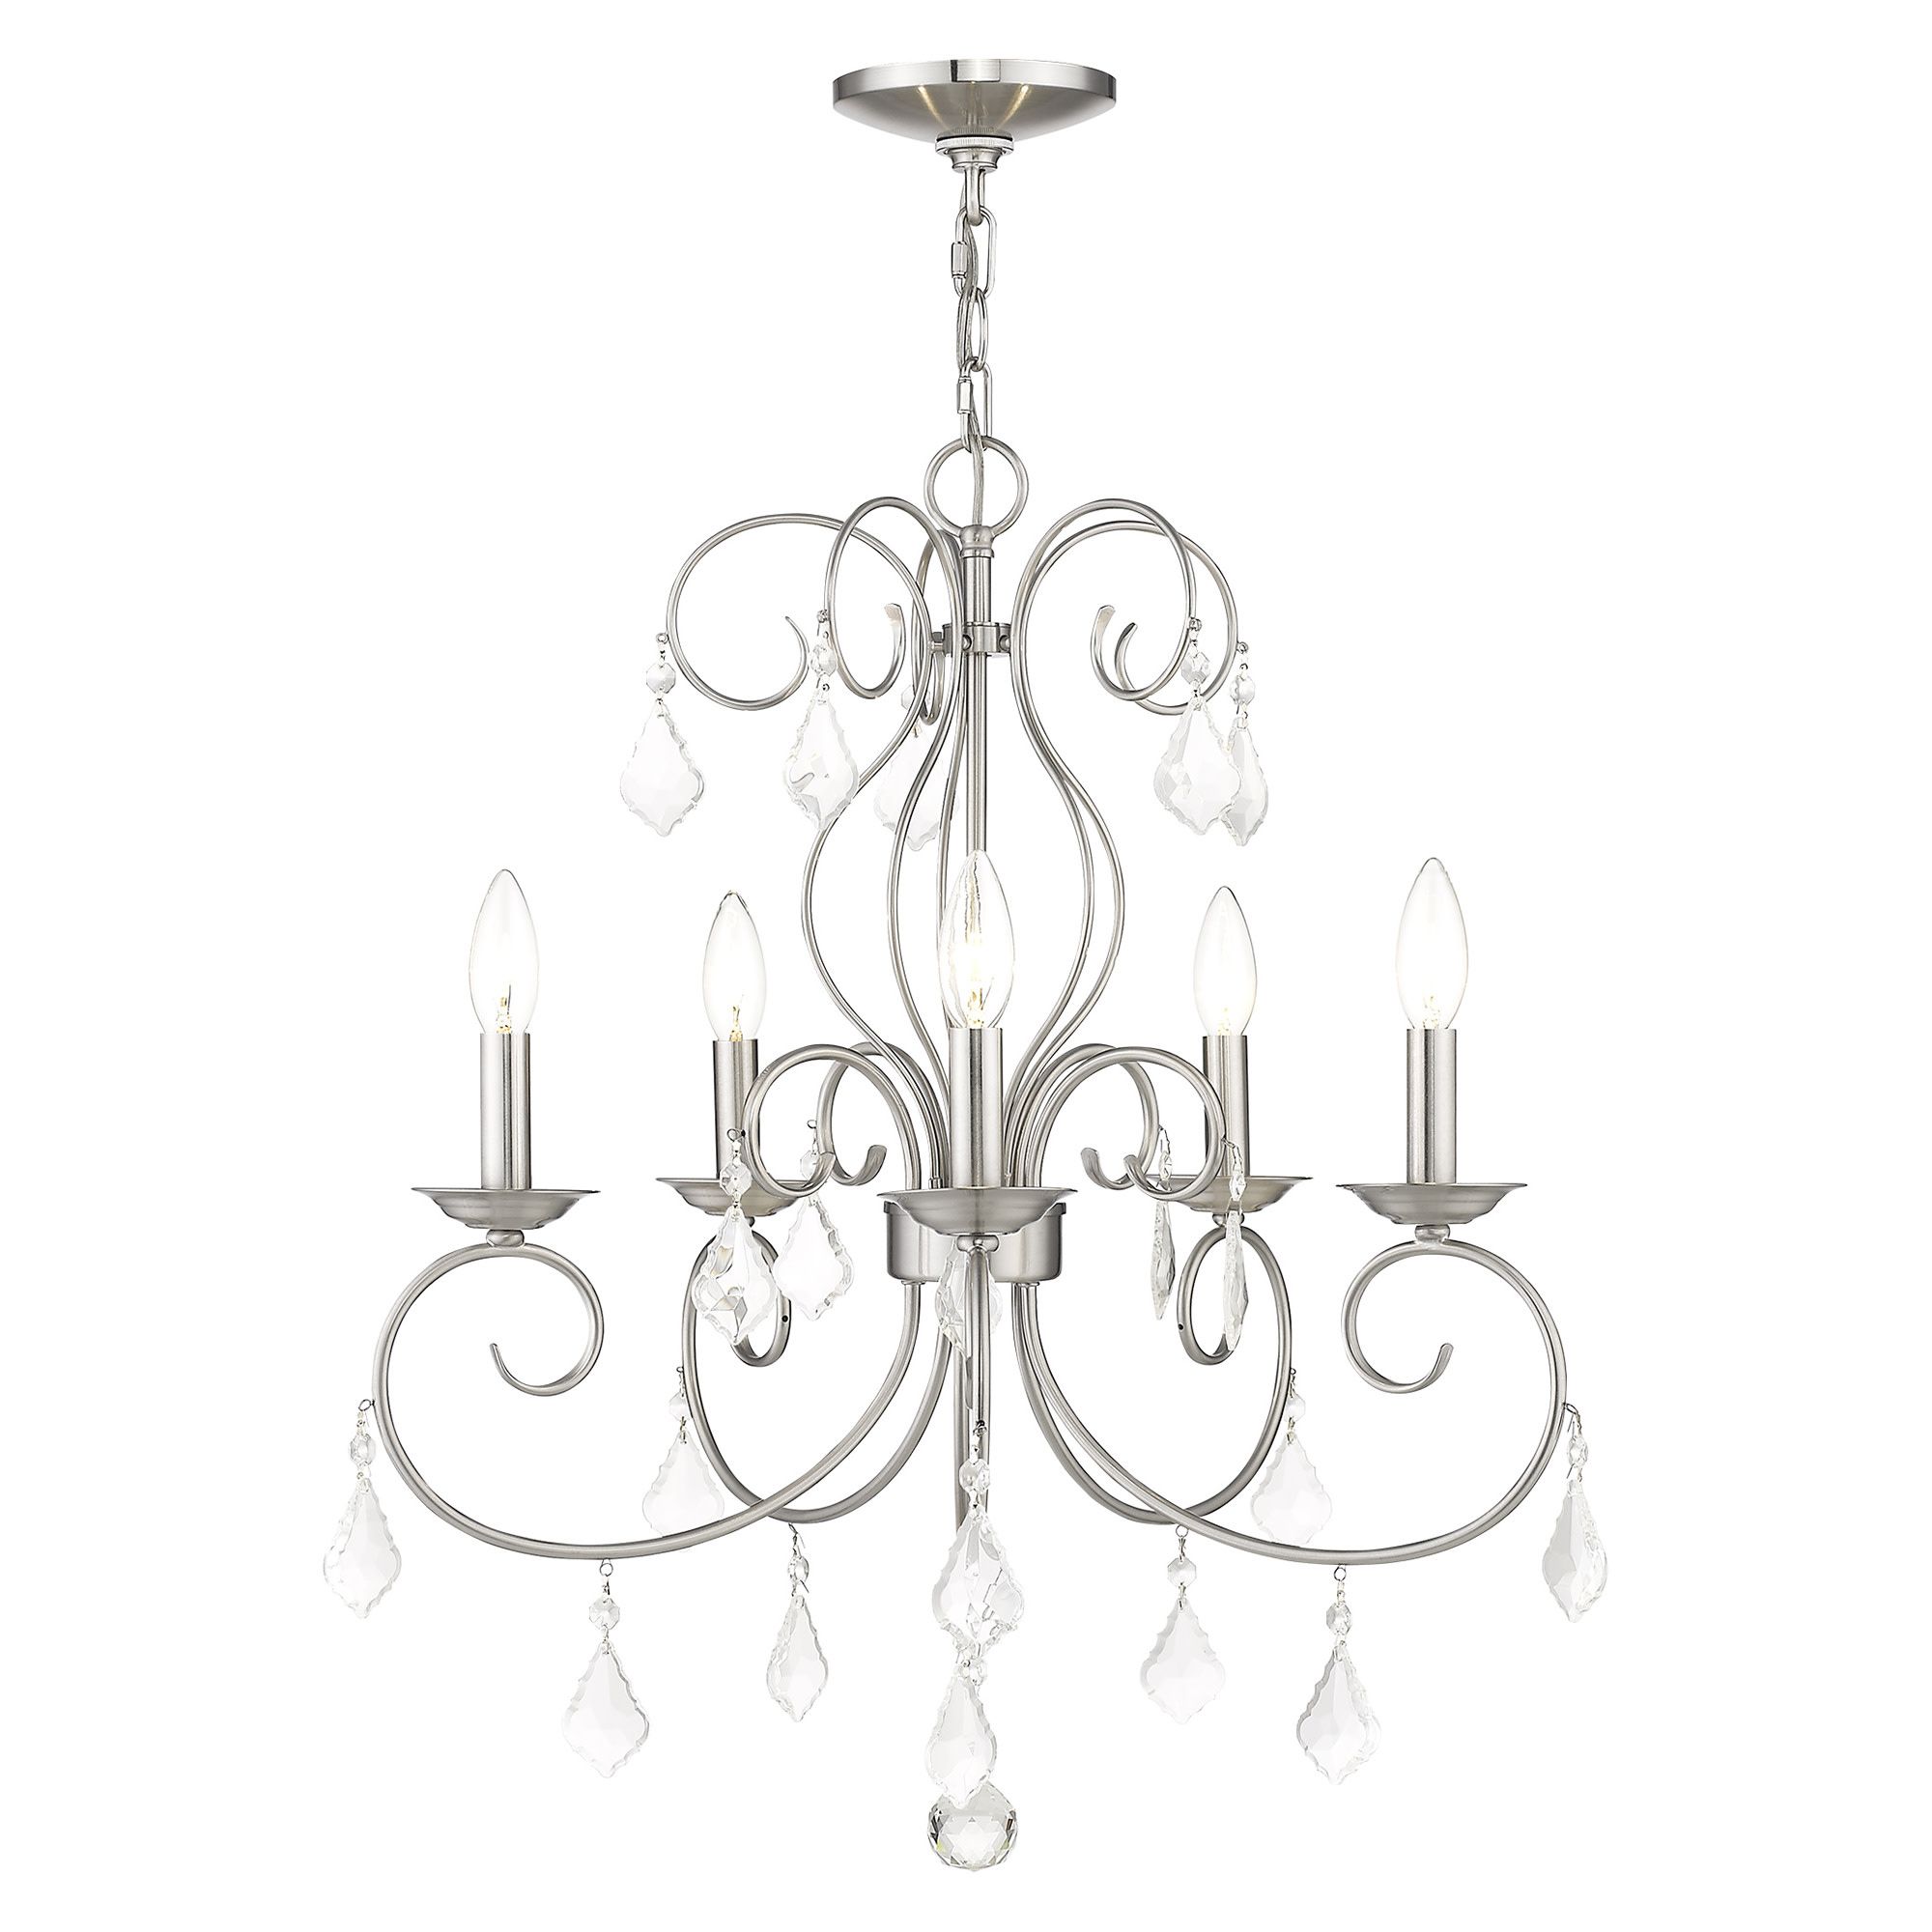 Most Up To Date Satin Nickel Five Light Single Tier Chandeliers Intended For Livex Lighting 50765 Nickel Donatella 5 Light 1 Tier (View 19 of 20)